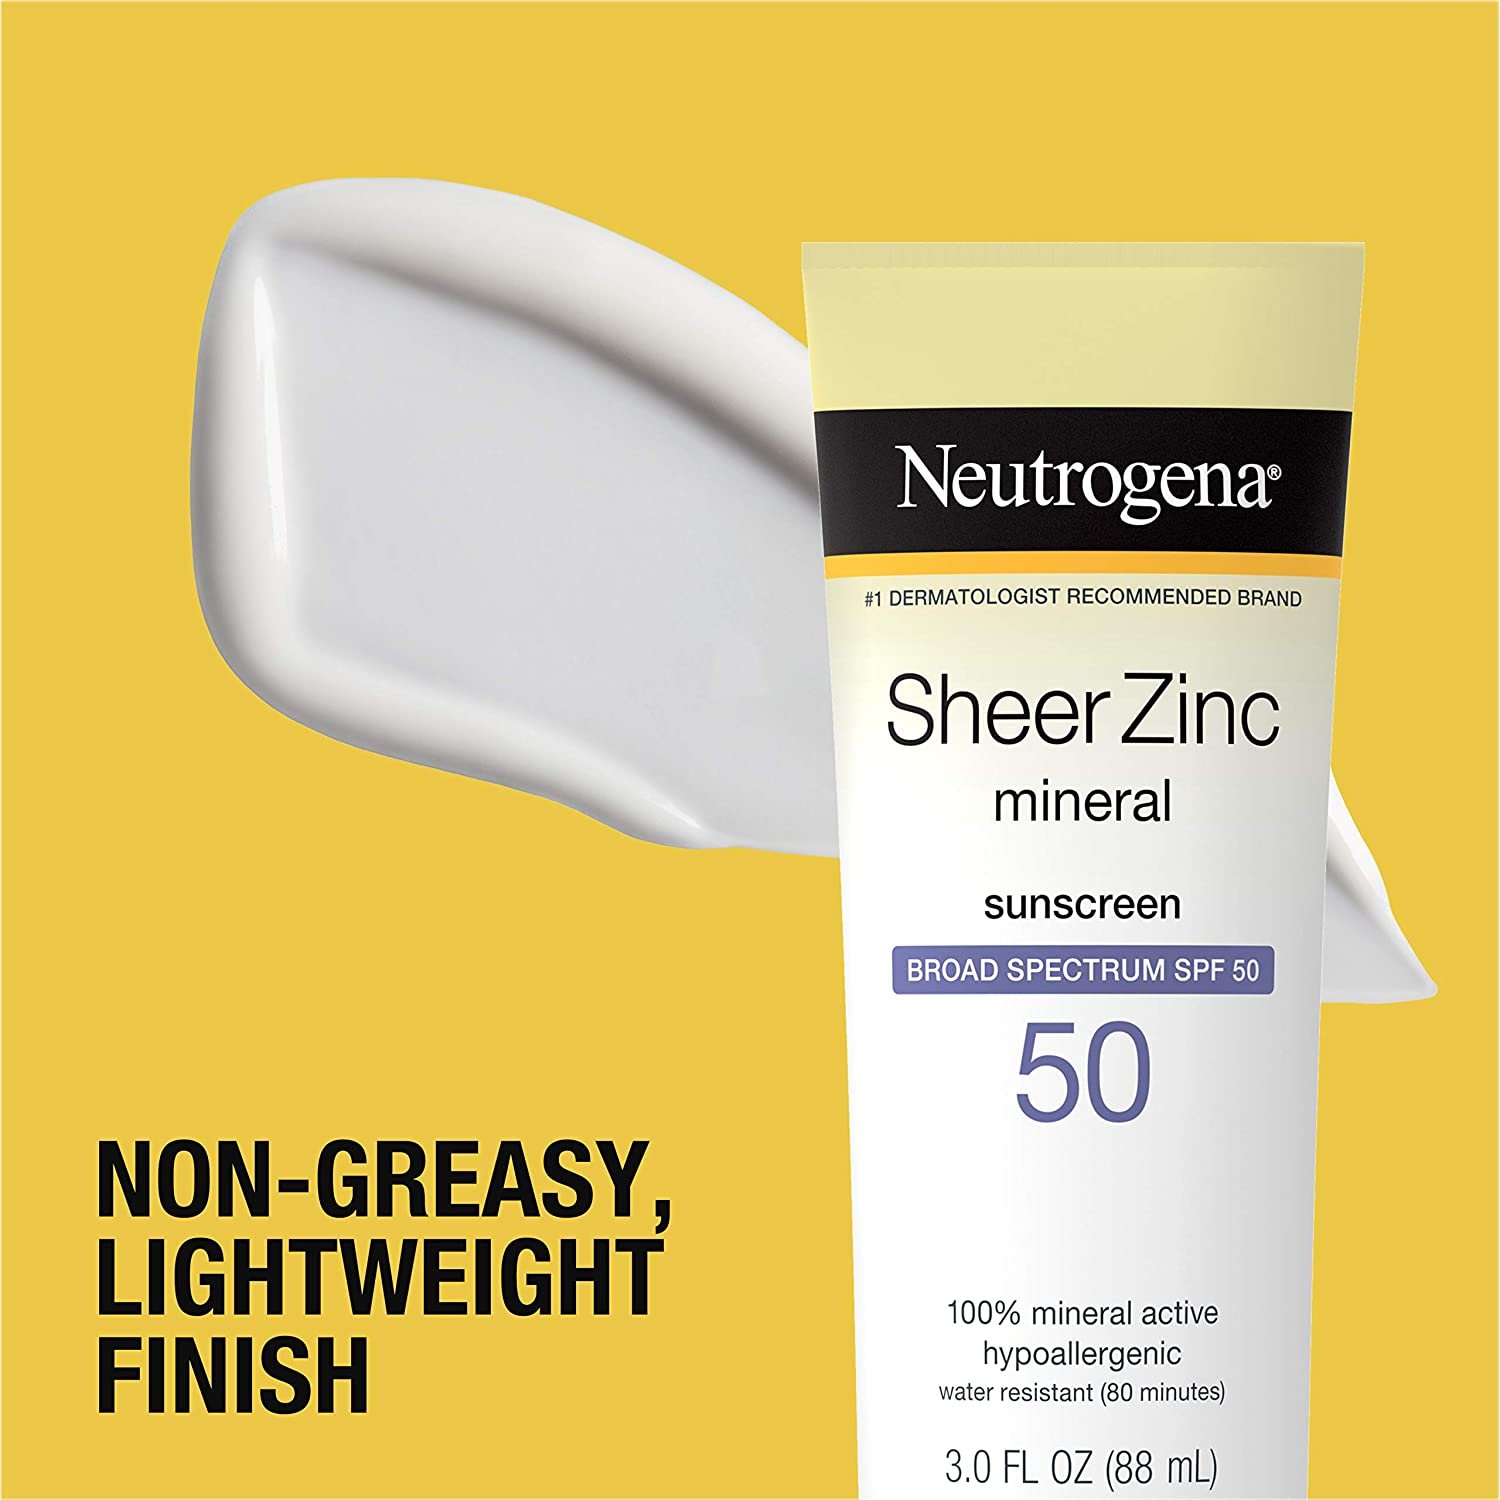 Neutrogena Sheer Zinc Dry-Touch Face Sunscreen With SPF 50, 2 Fl. Oz, 6-Pack - image 5 of 7